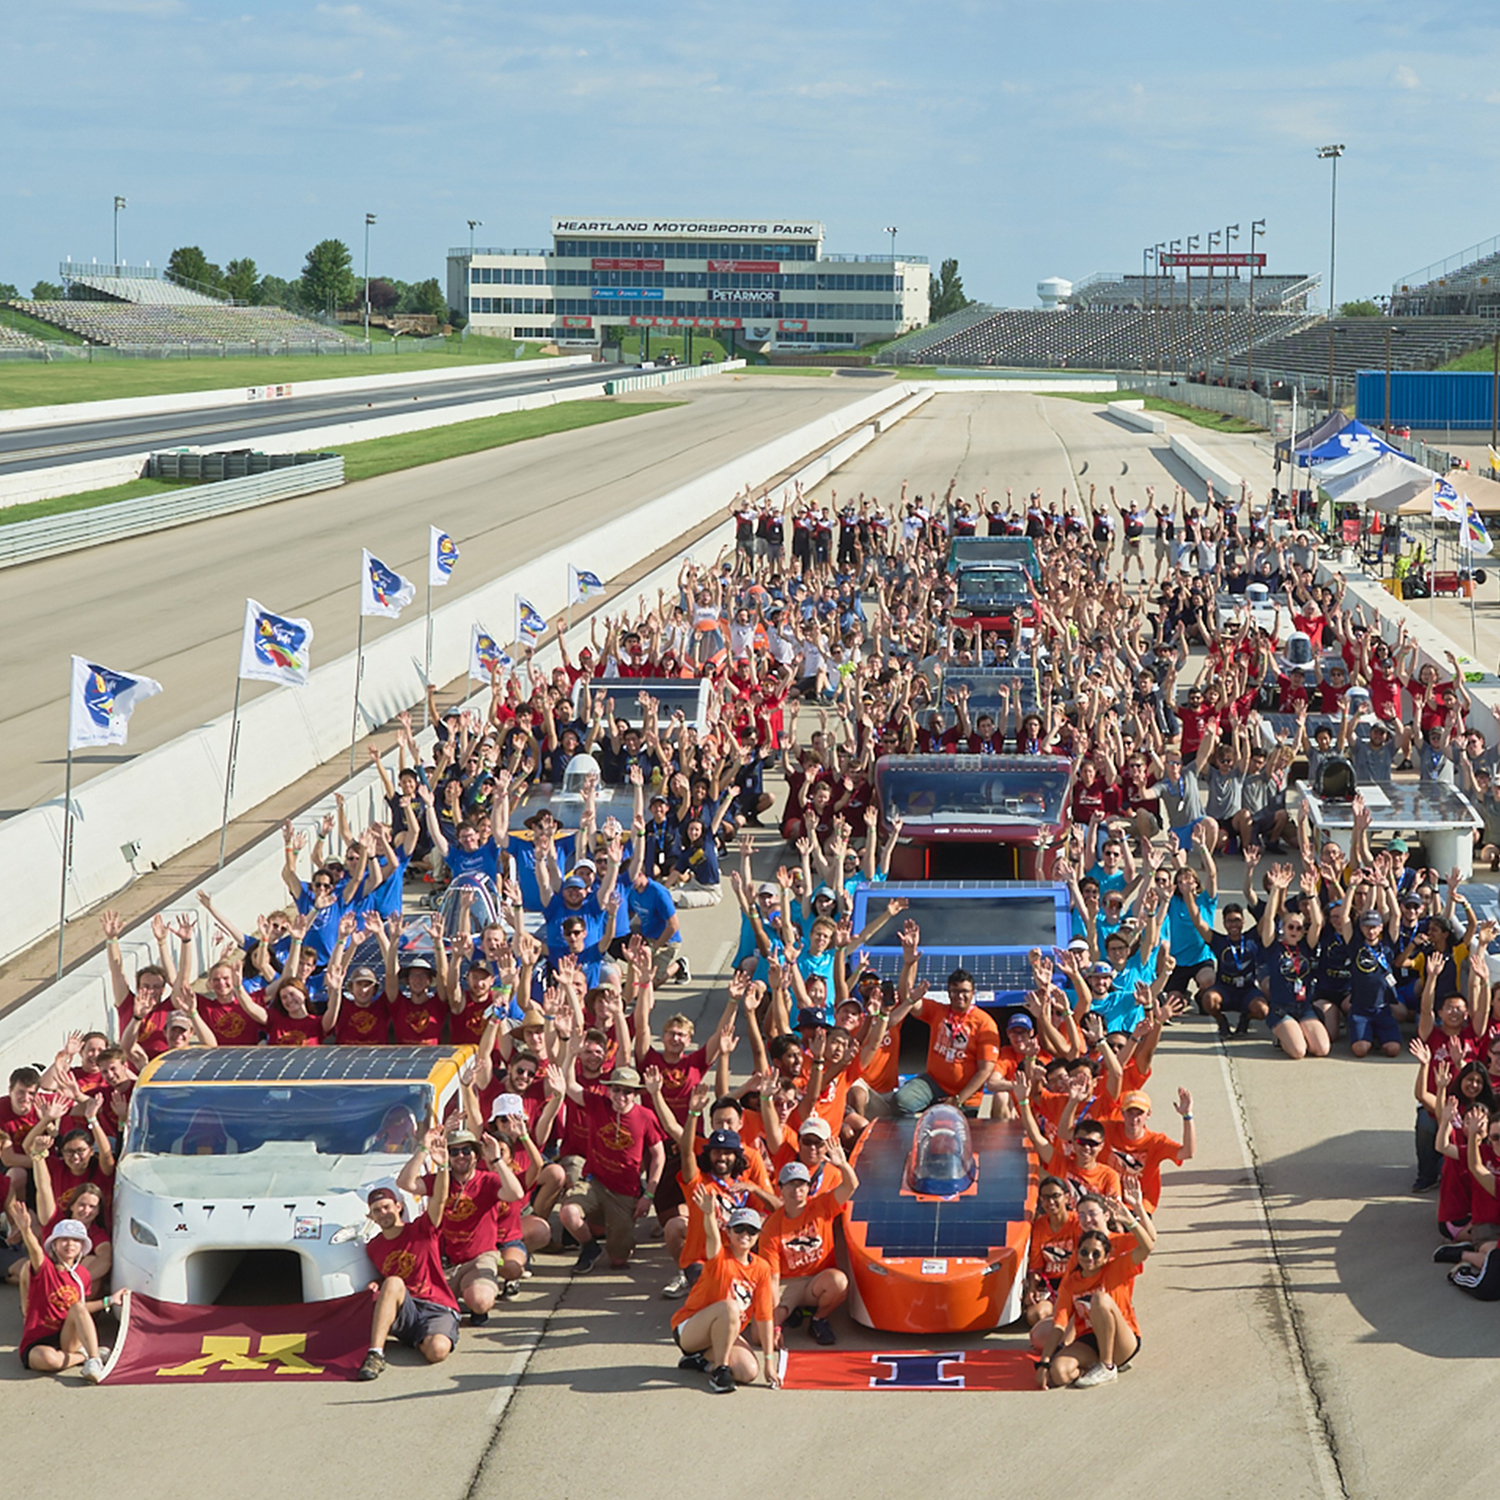 a large group of people and vehicles on a race track